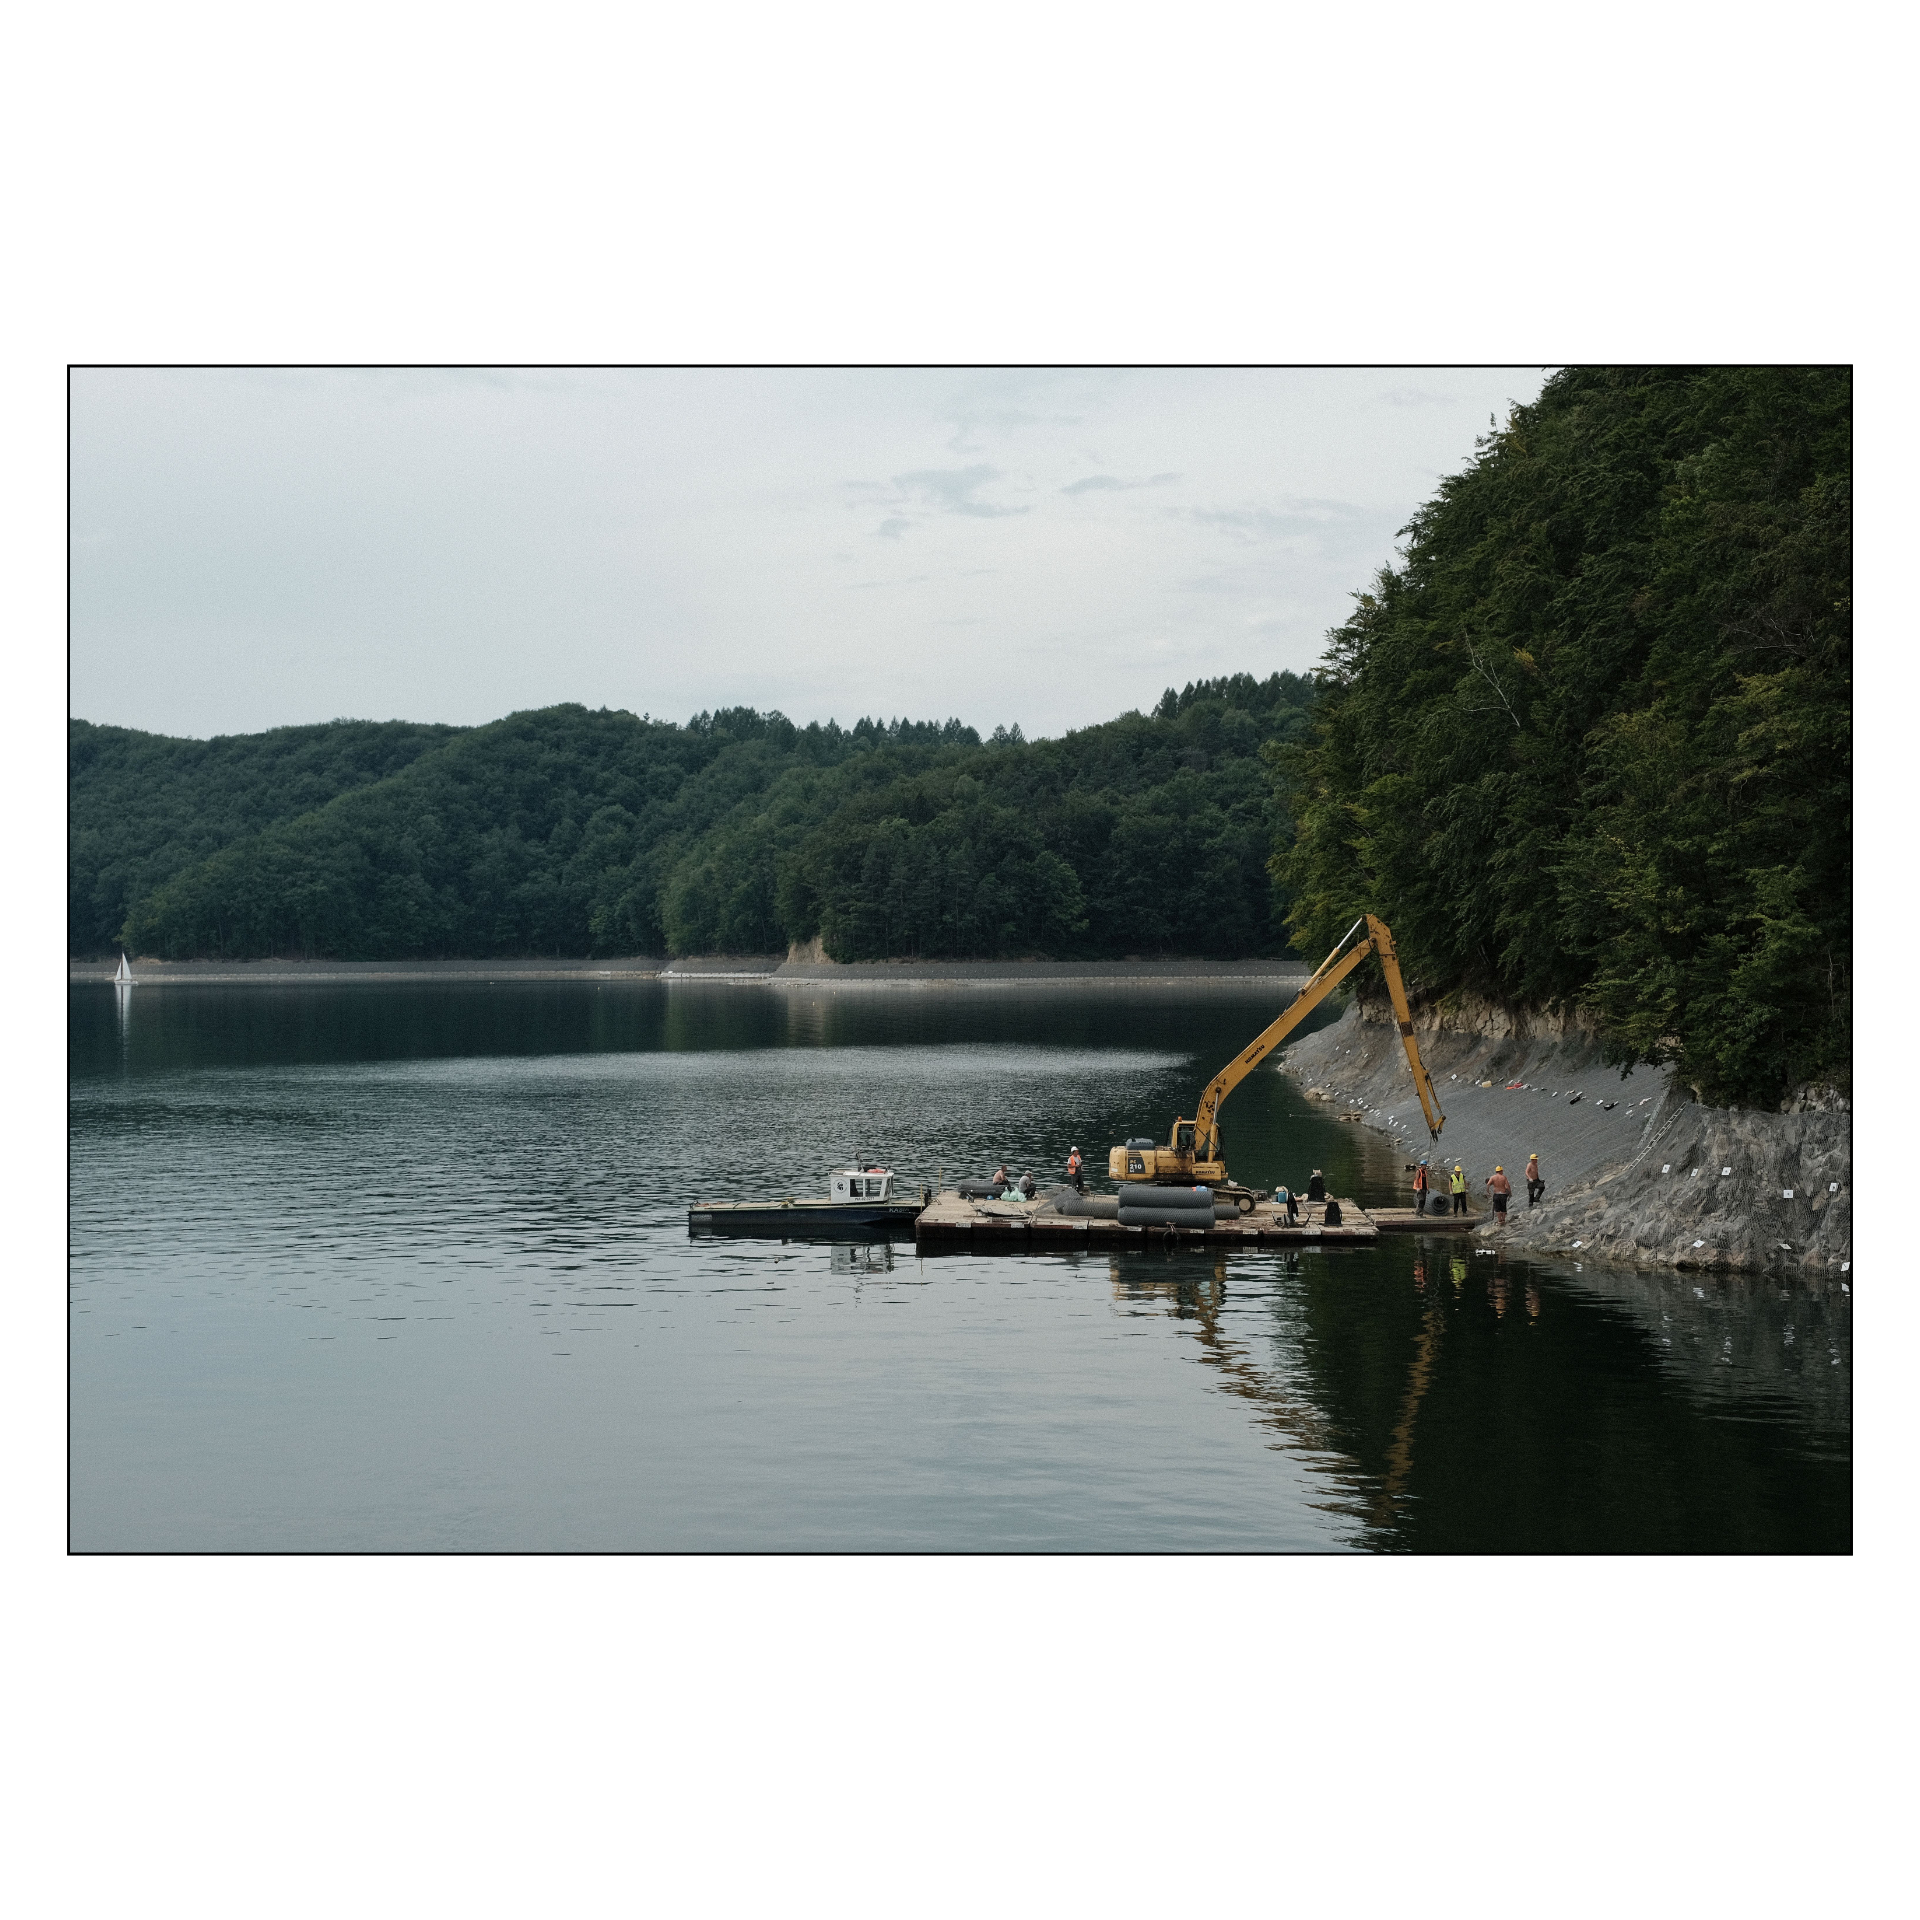 construction workers on a lake